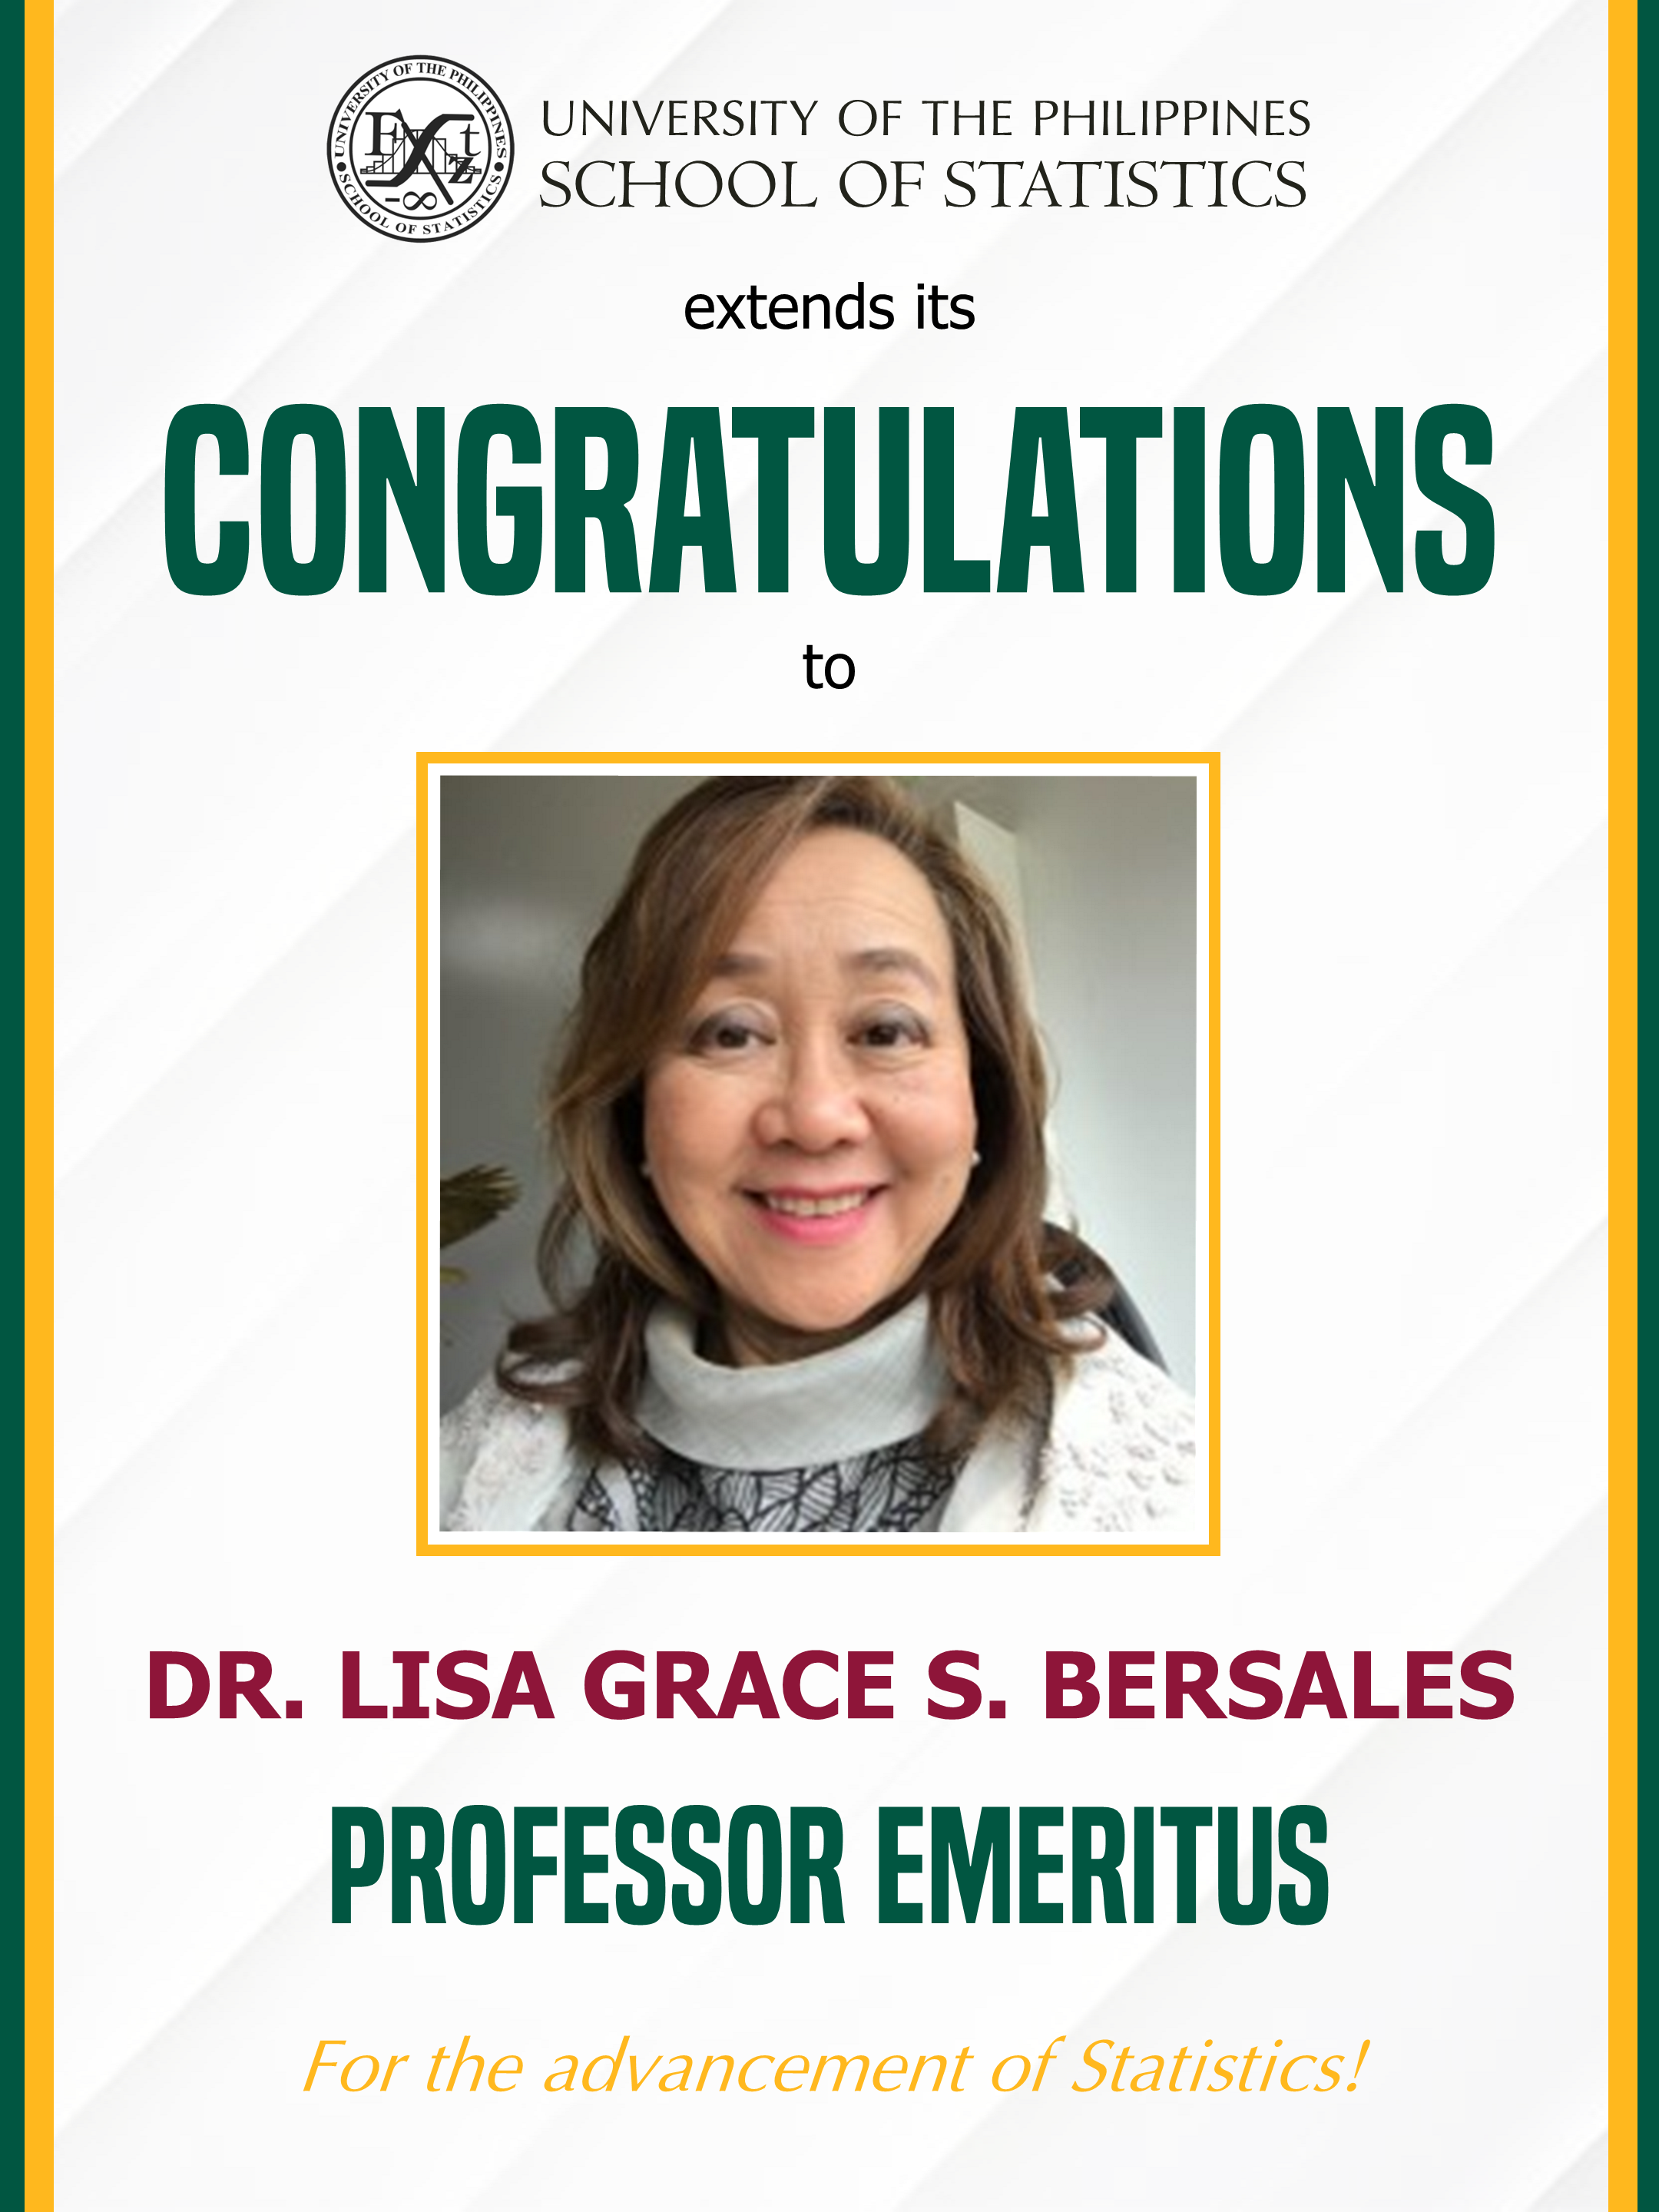 Image for Dr. Lisa Bersales is awarded Professor Emeritus of UP